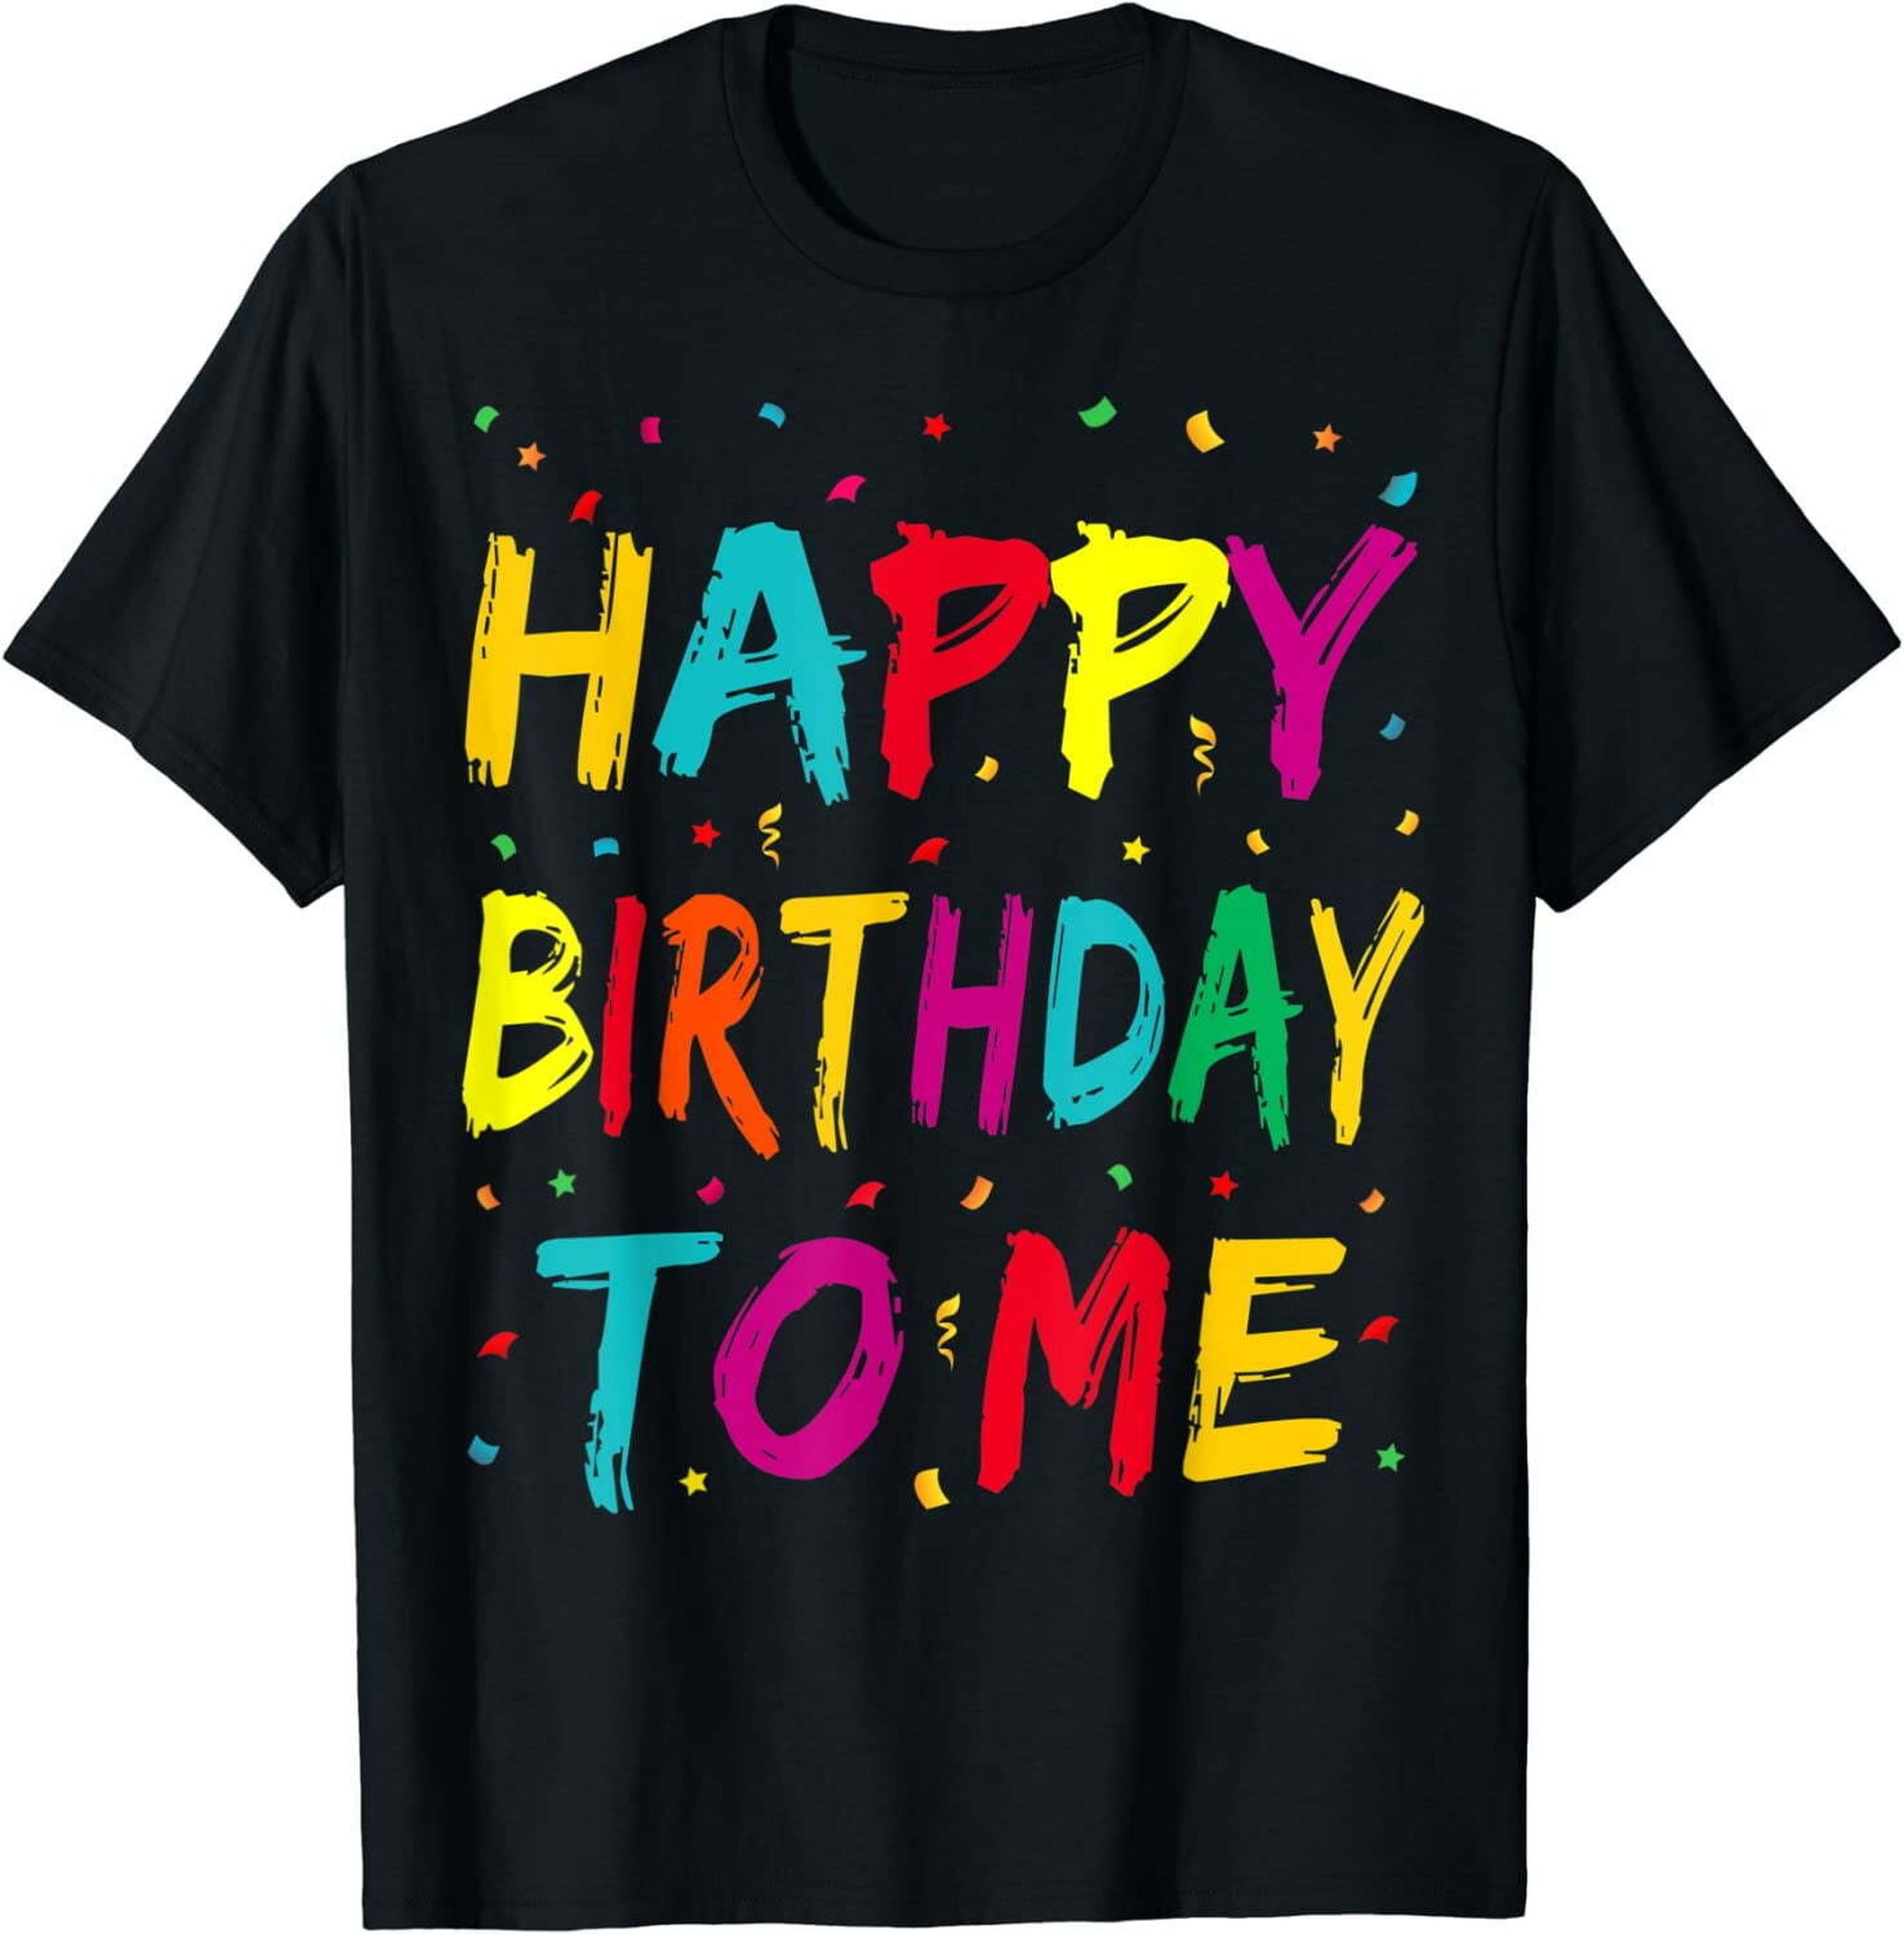 Celebrate with Me Birthday Party Tee for Children and Adults - Walmart.com